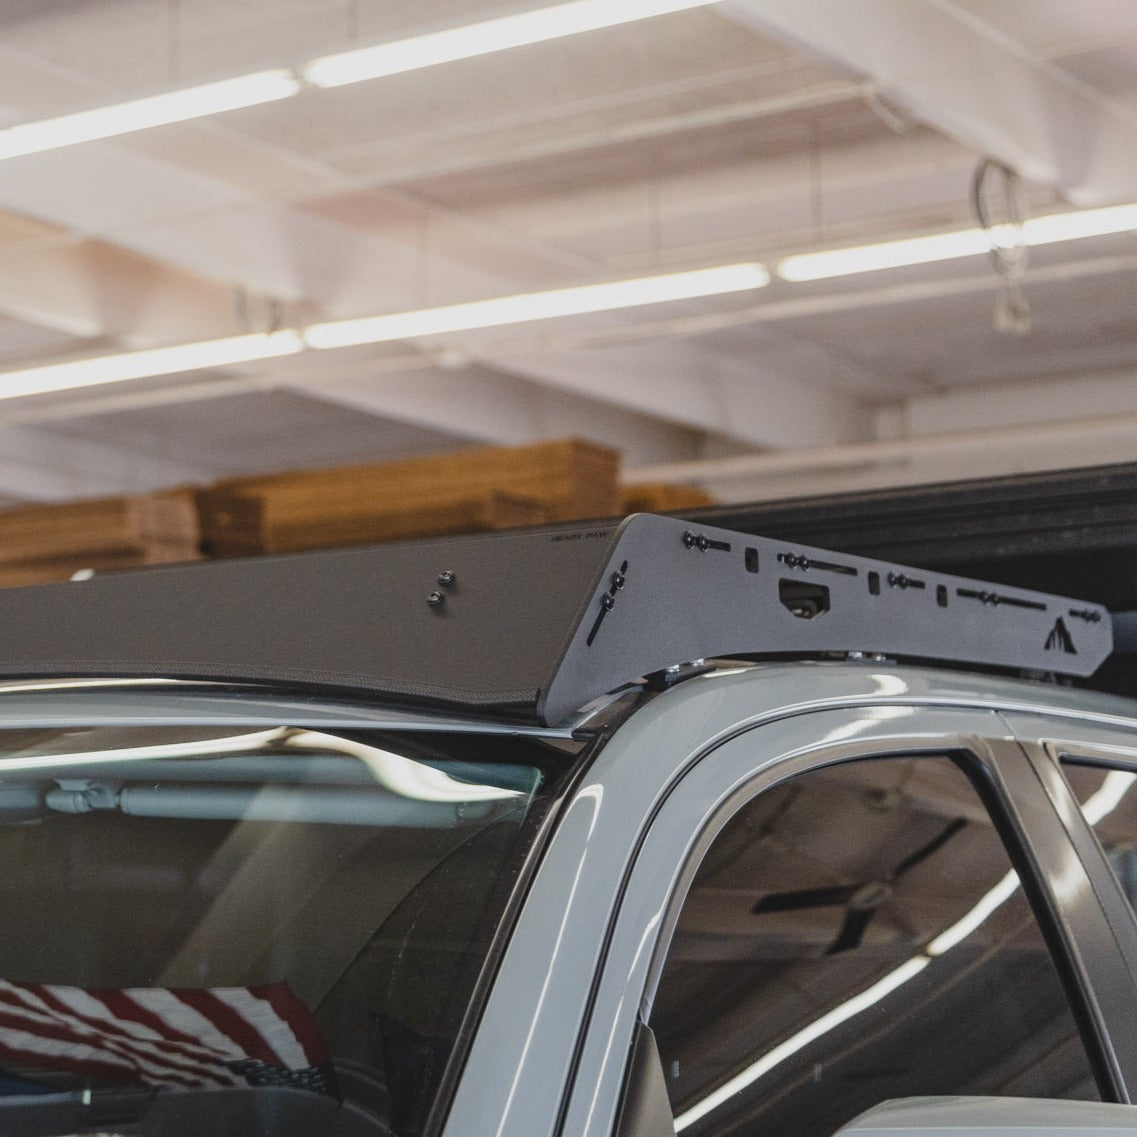 The Bear Paw (2007-2021 Tundra Camper Roof Rack)